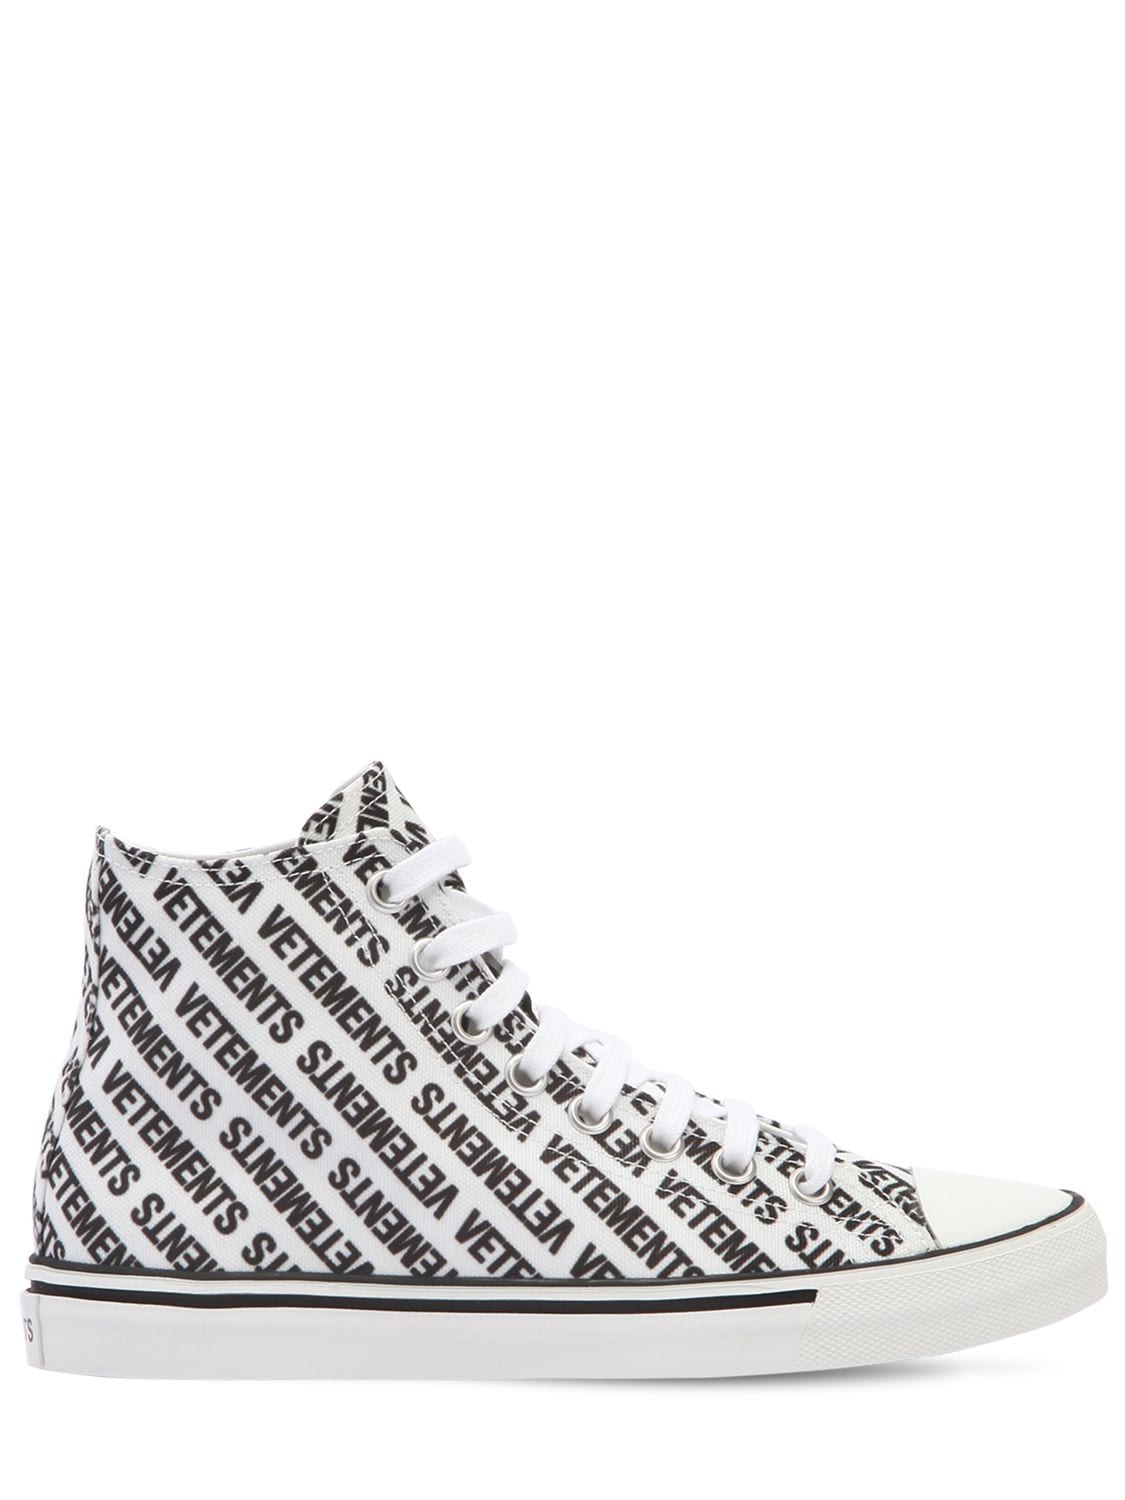 Vetements 20mm Logo Print Canvas High Top Trainers In White/black